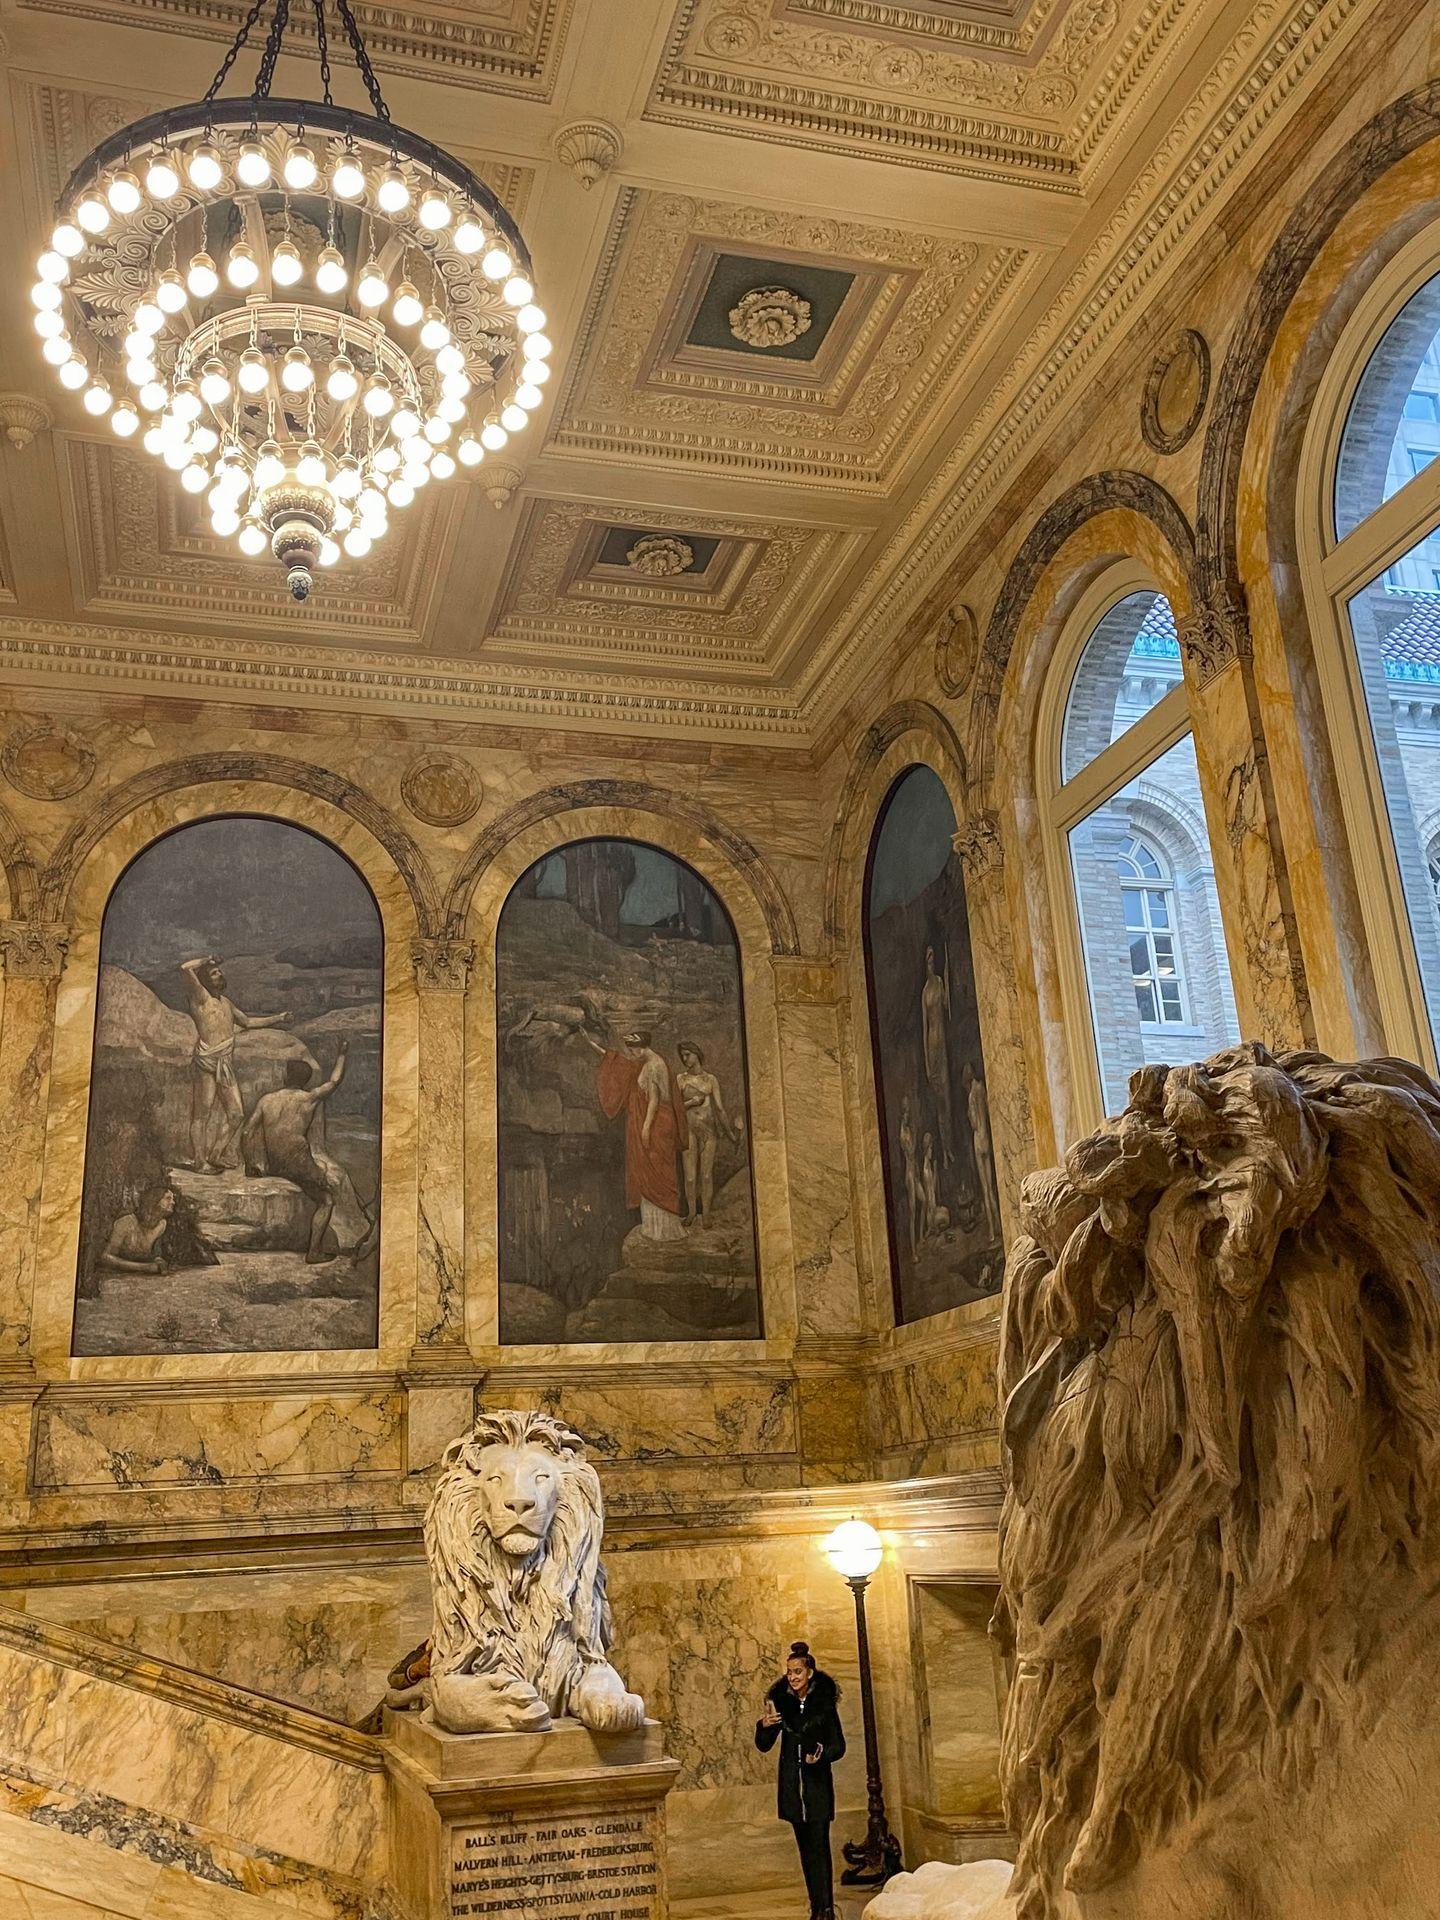 A staircase inside the Boston Public Library that includes artwork, a chandelier and lion statues.